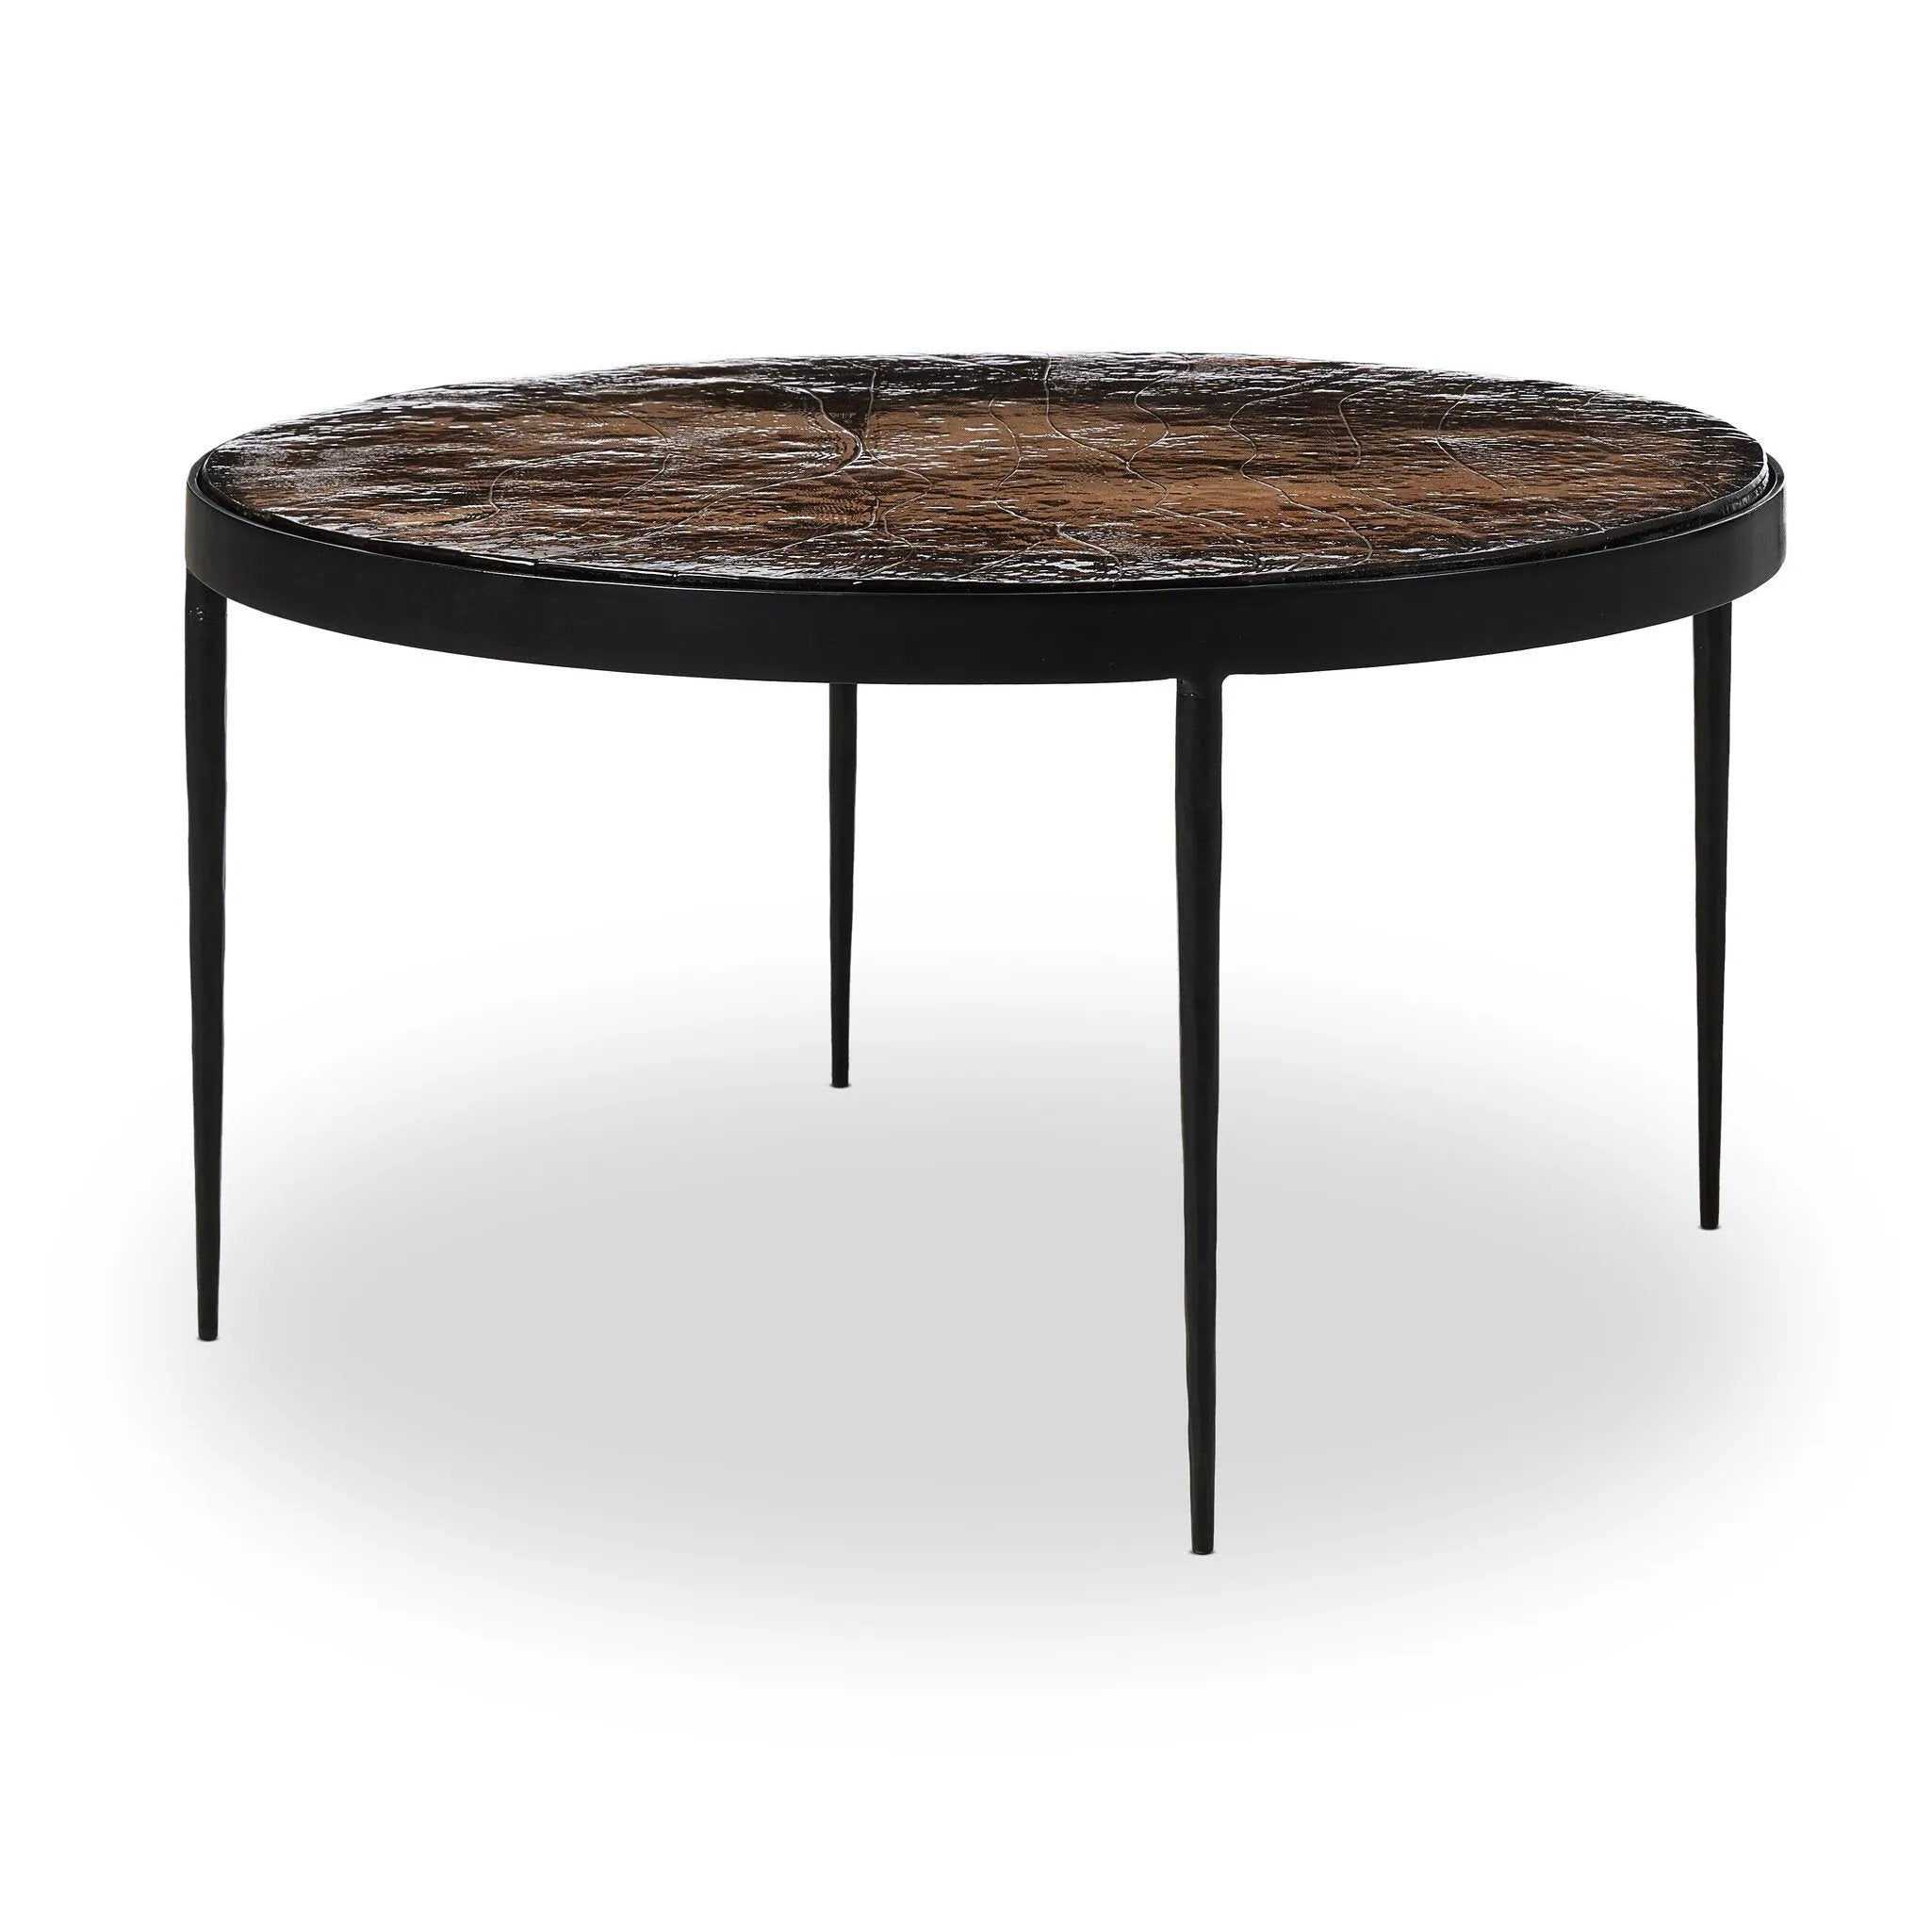 Smoky brown glass-topped table with slim, tapered matte black metal frames for a sleek, modern look. Part of a nesting set, can be used alone or paired with its smaller counterpart.Collection: Marlo Amethyst Home provides interior design, new home construction design consulting, vintage area rugs, and lighting in the Alpharetta metro area.